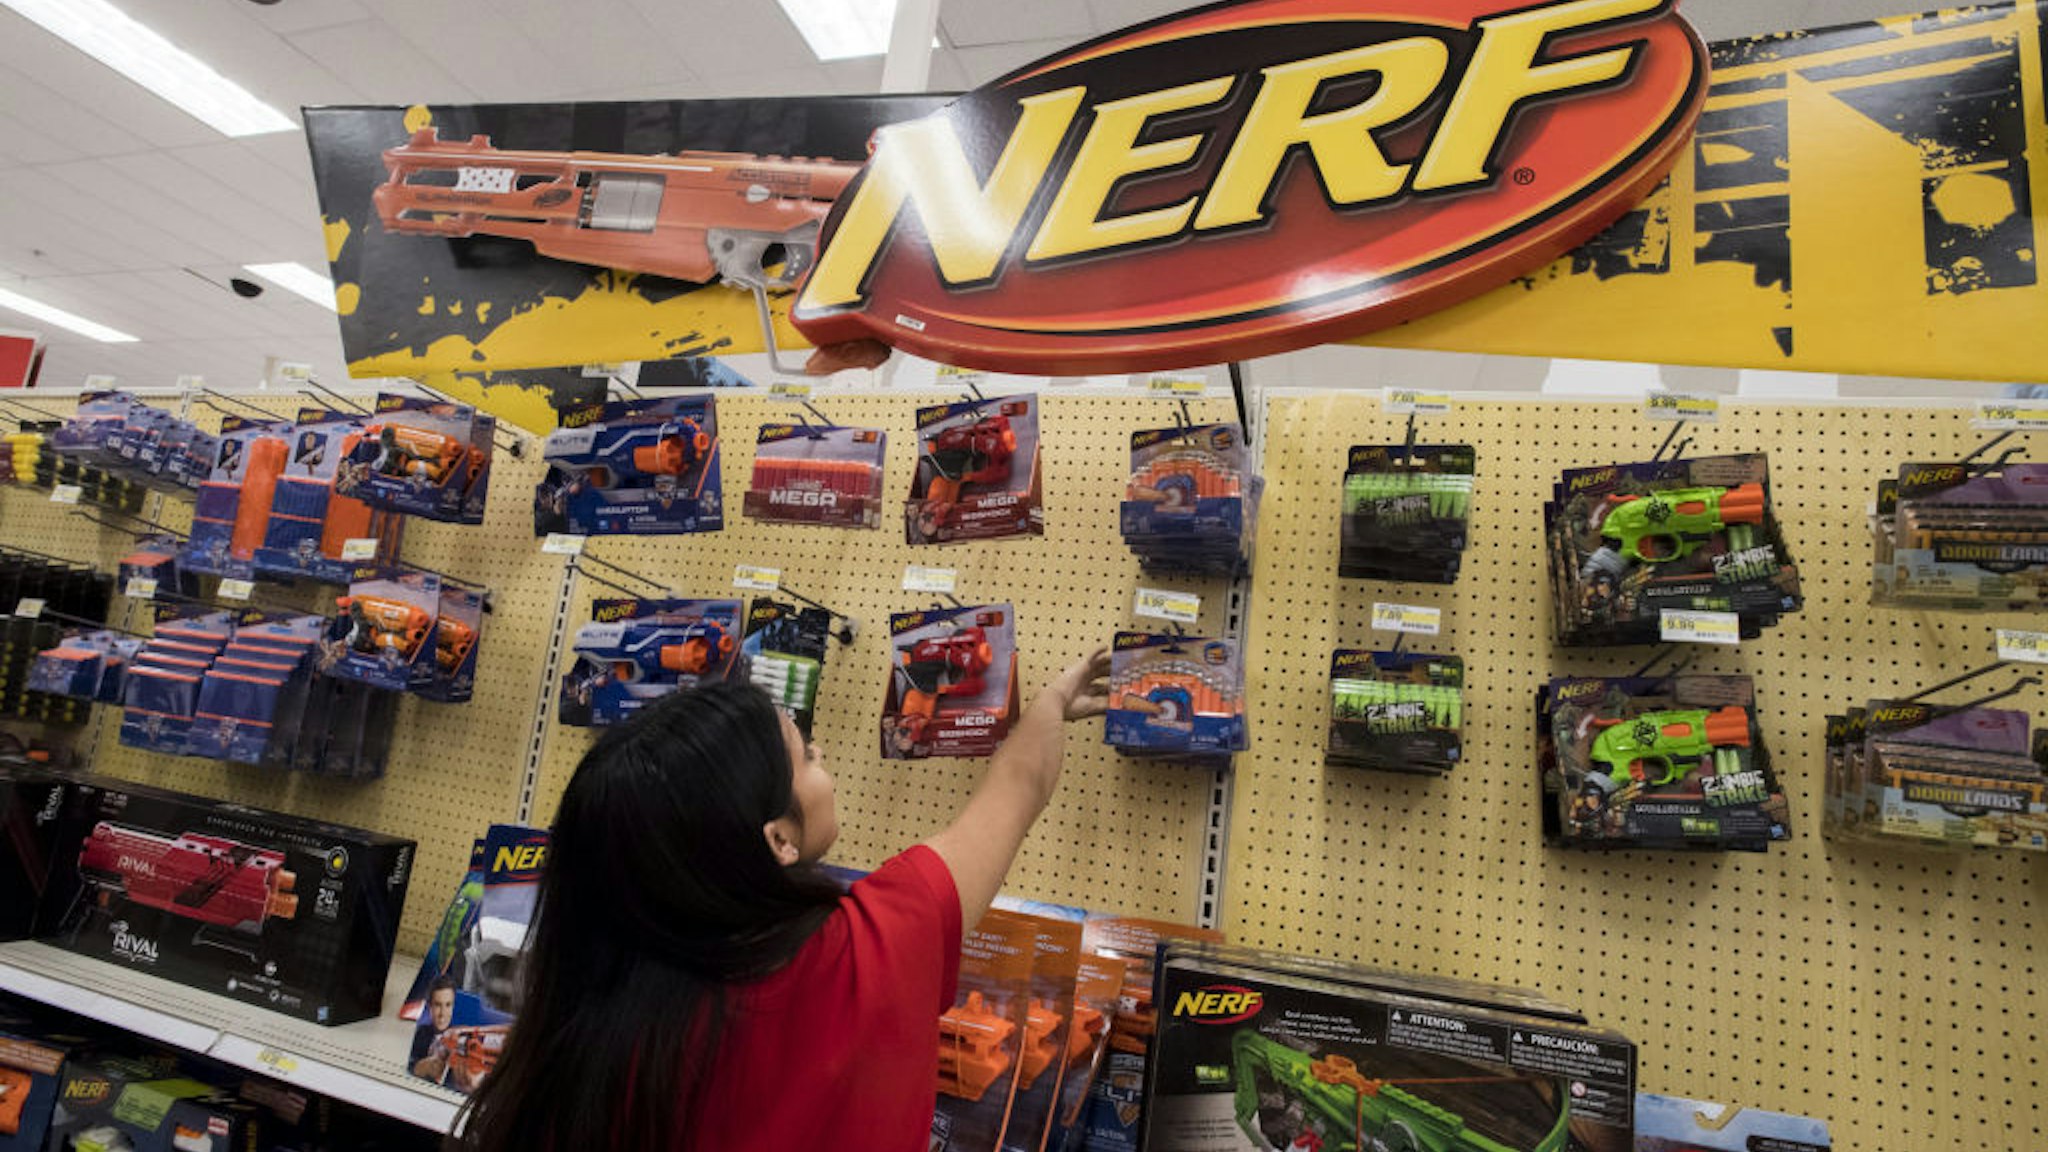 A worker arranges a shelf of Hasbro Inc. Nerf Blaster products at a Target Corp. location in Emeryville, California, U.S.